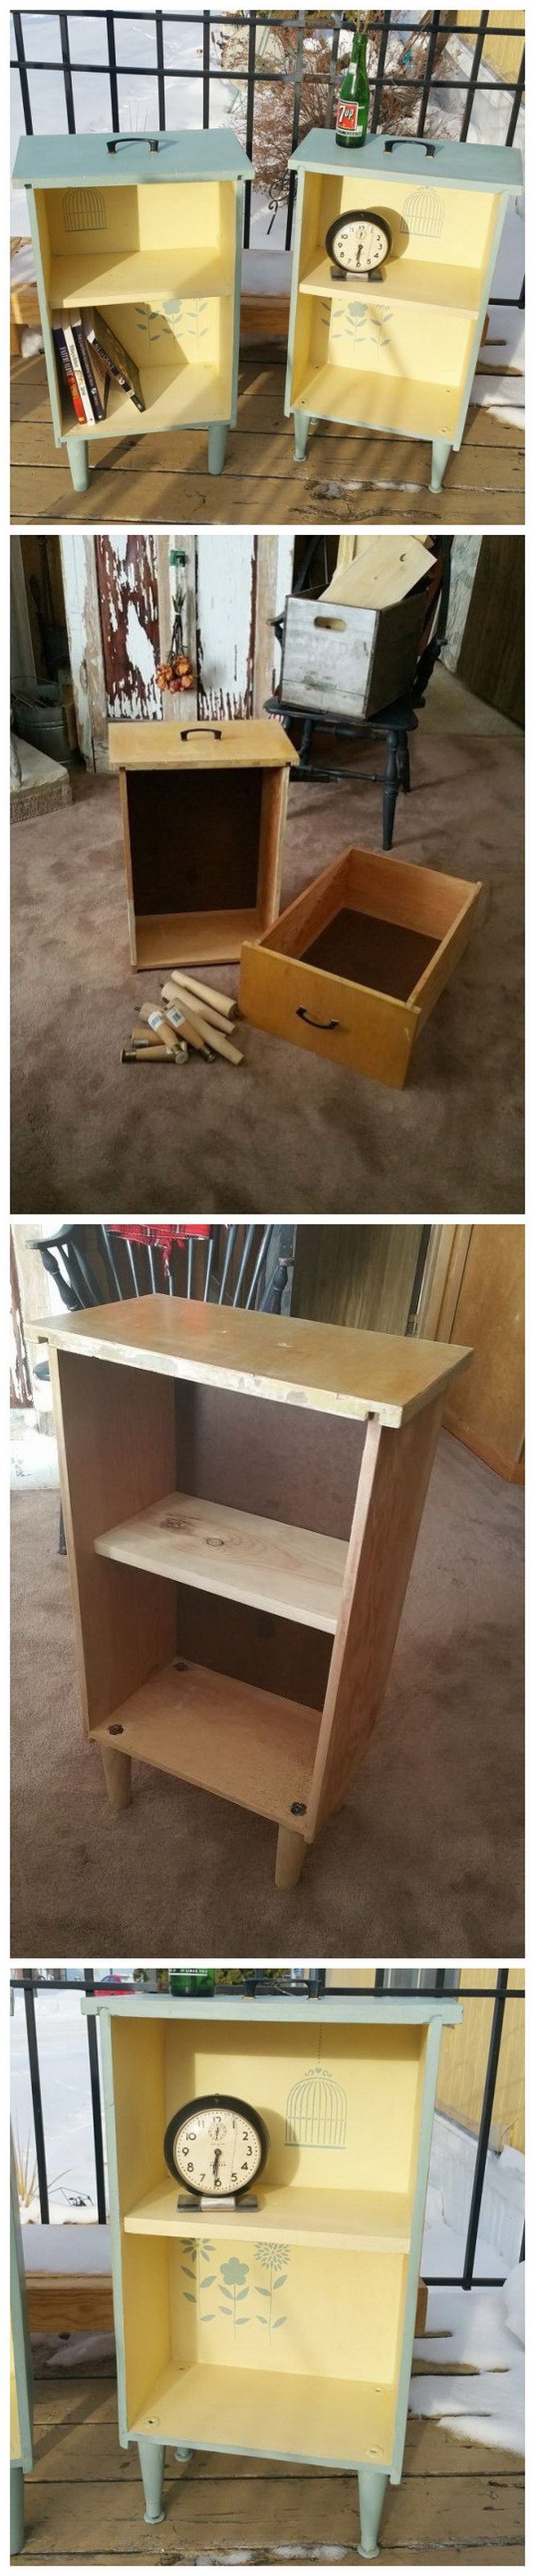 Upcycled Drawers to Side Tables: Get some old drawers and turned them into bright side tables. 